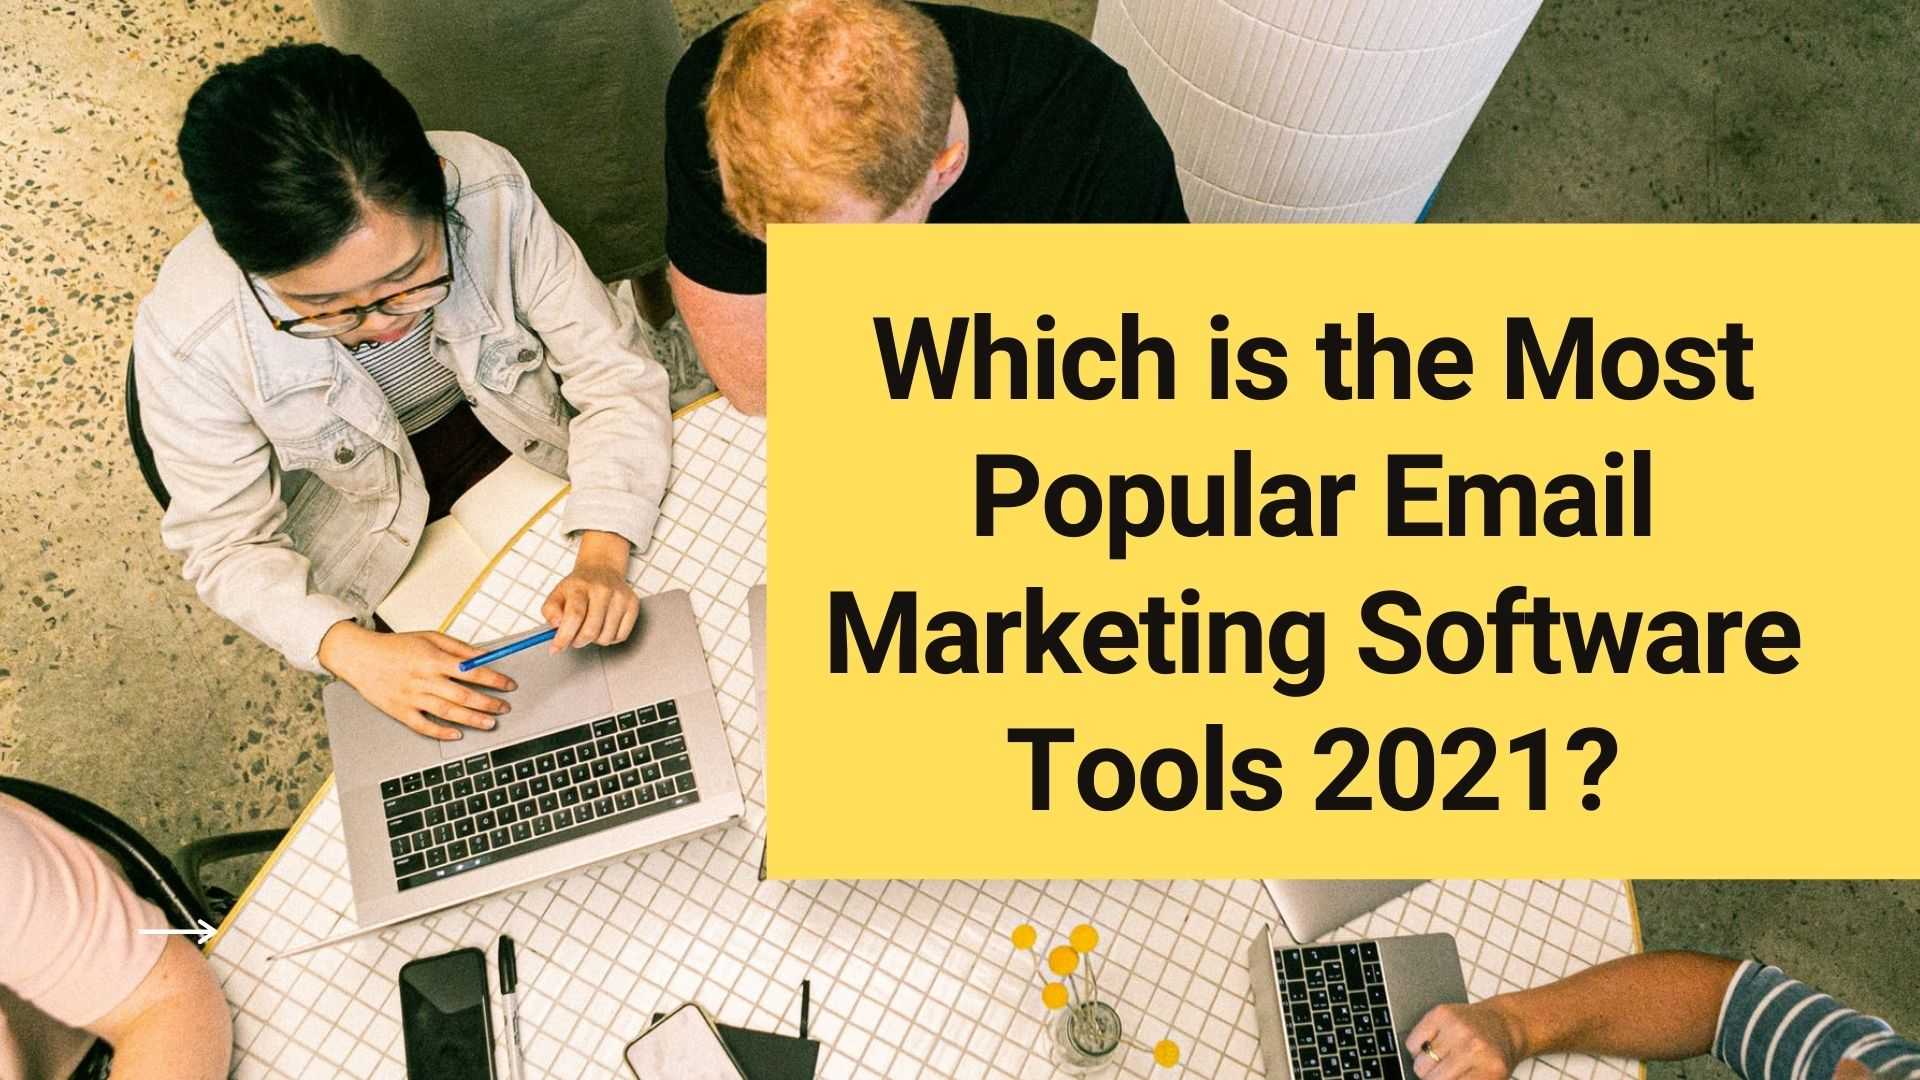 Which is the Most Popular Email Marketing Software Tools 2021